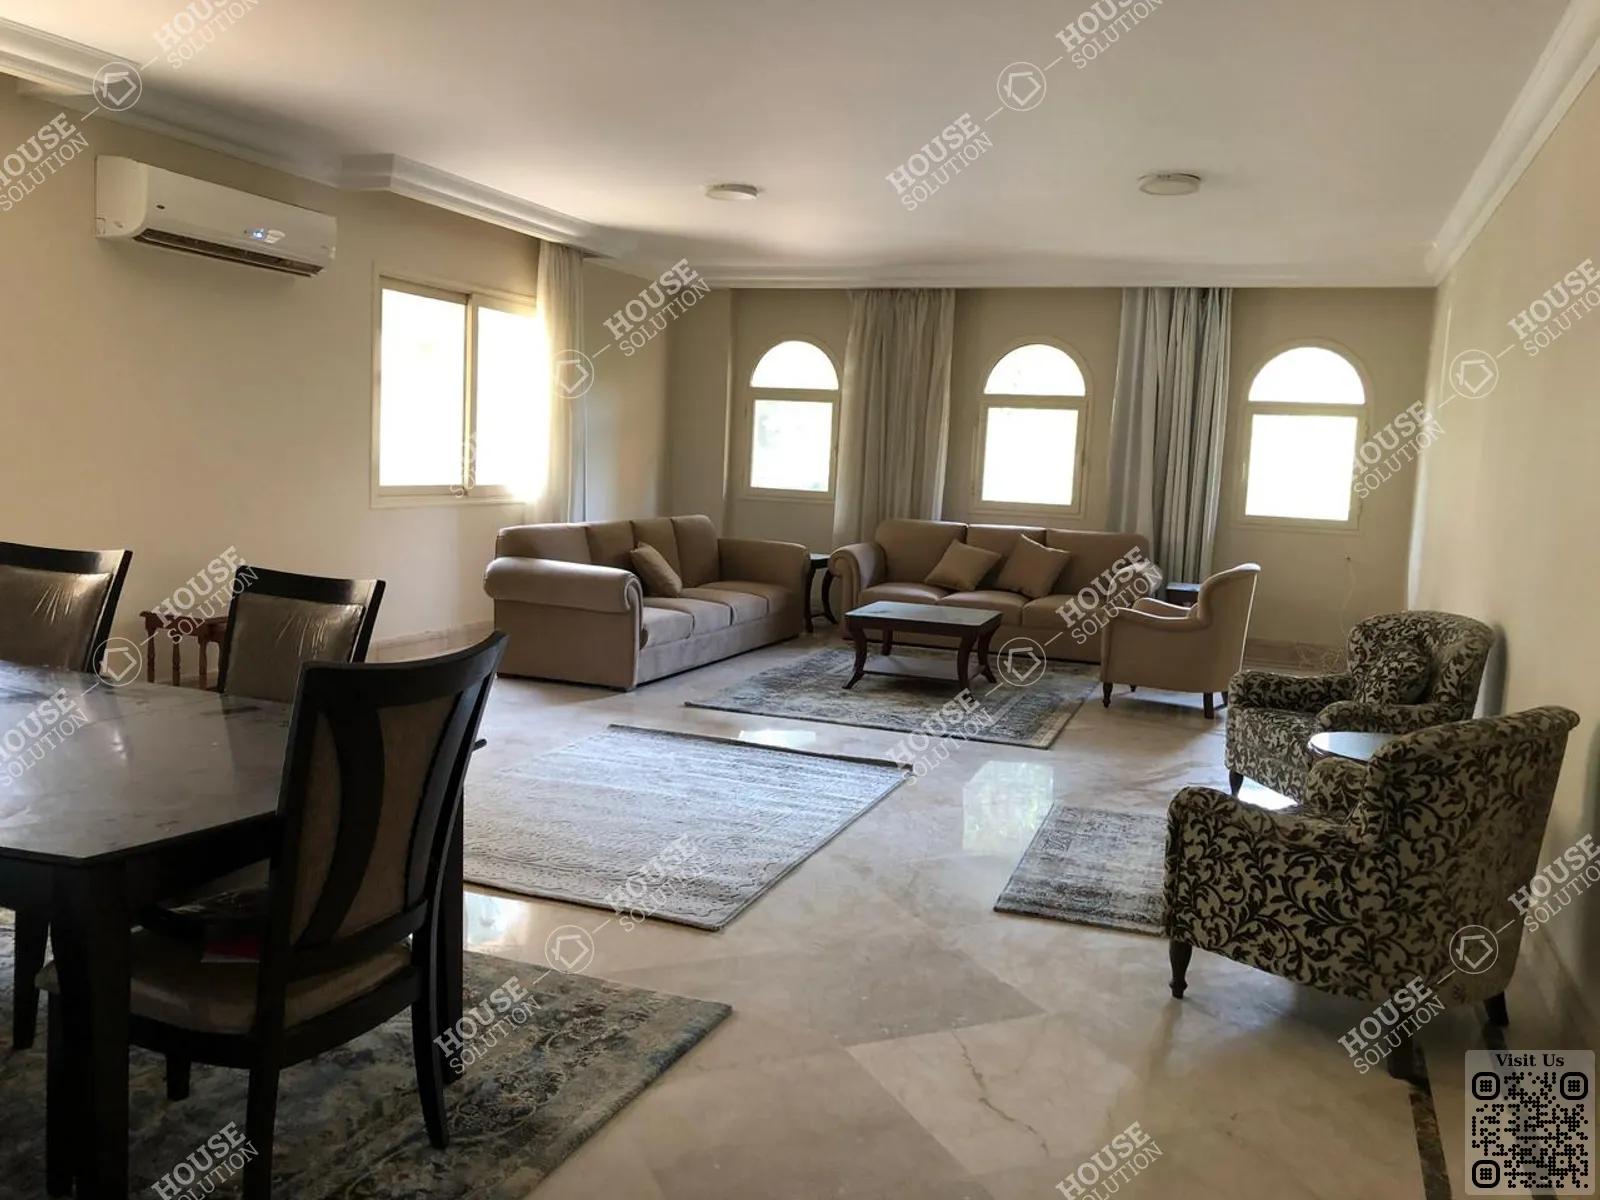 RECEPTION  @ Apartments For Rent In Maadi Maadi Sarayat Area: 320 m² consists of 4 Bedrooms 3 Bathrooms Modern furnished 5 stars #5459-0